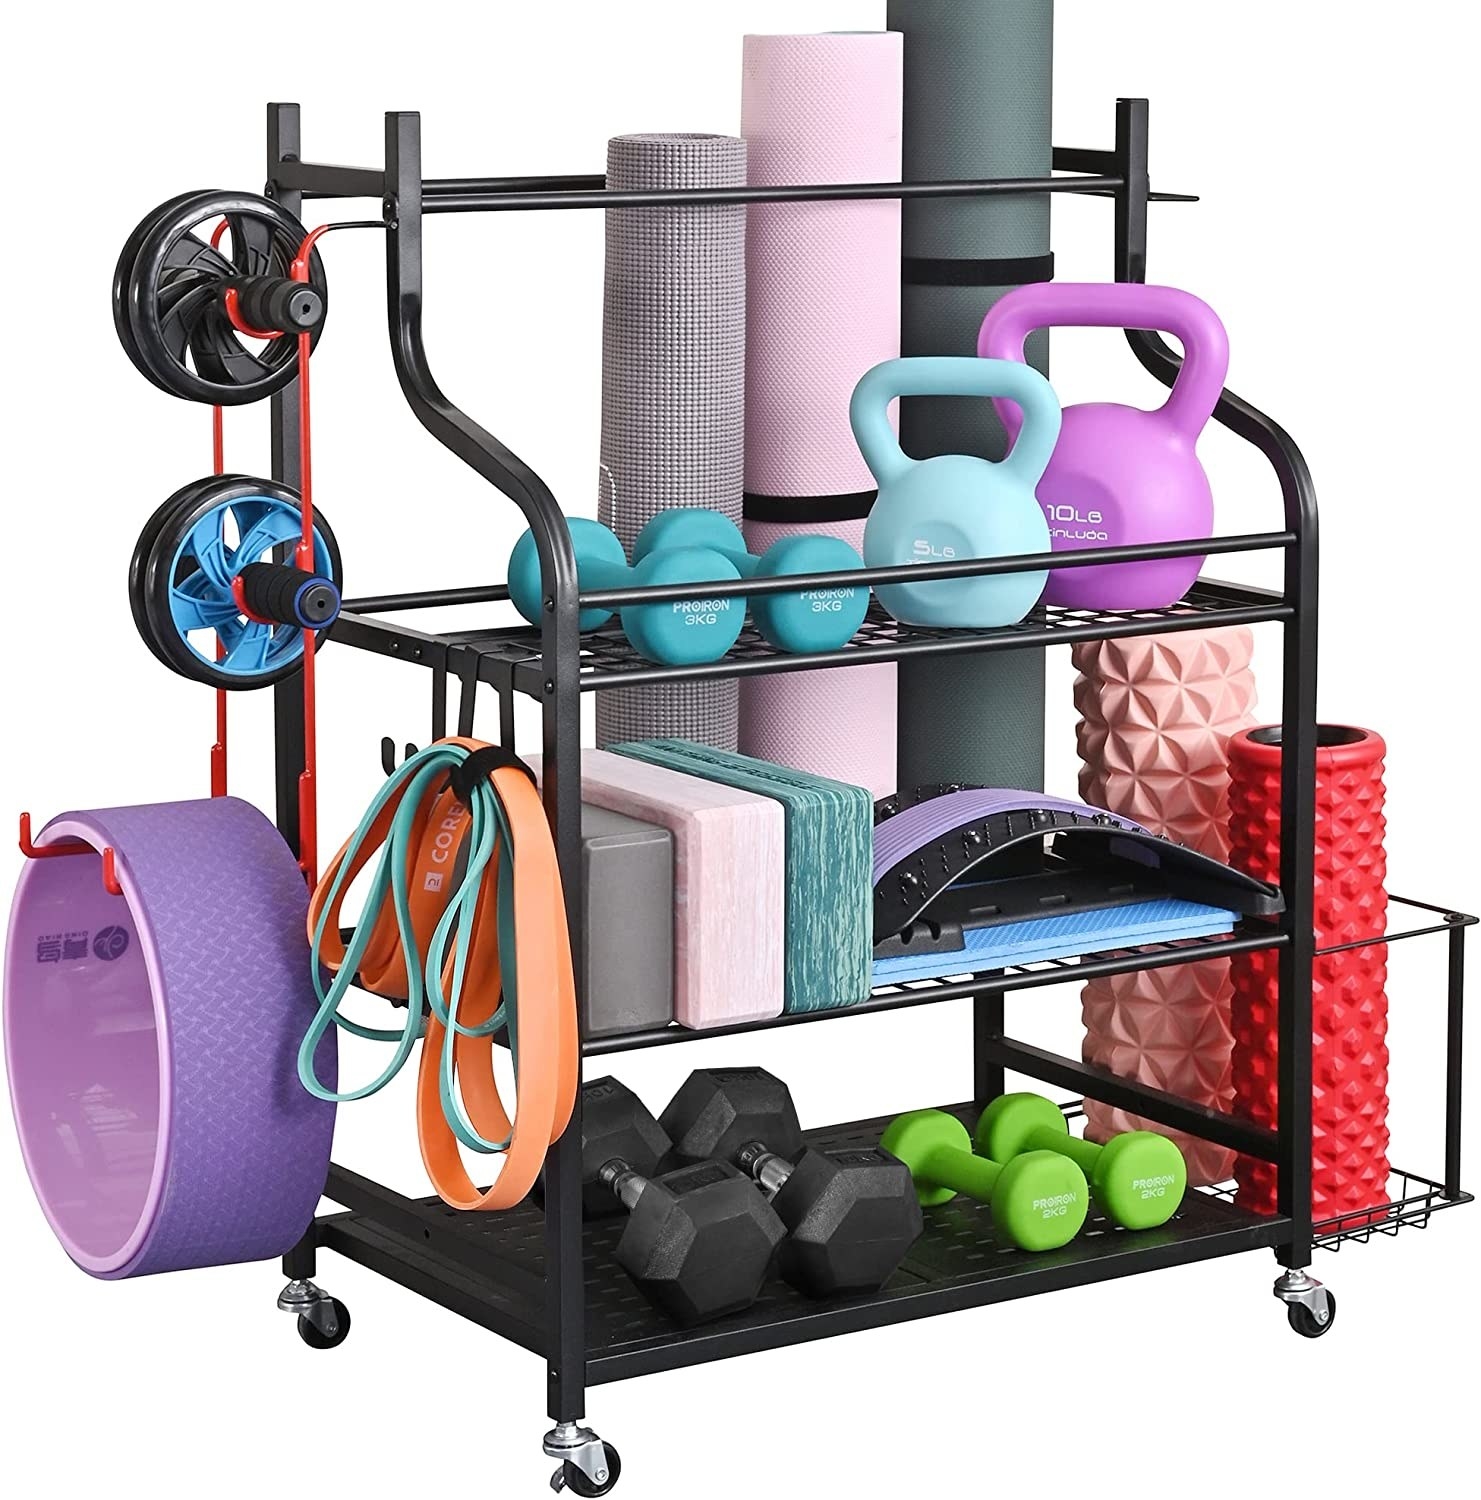 the rack with exercise equipment on it